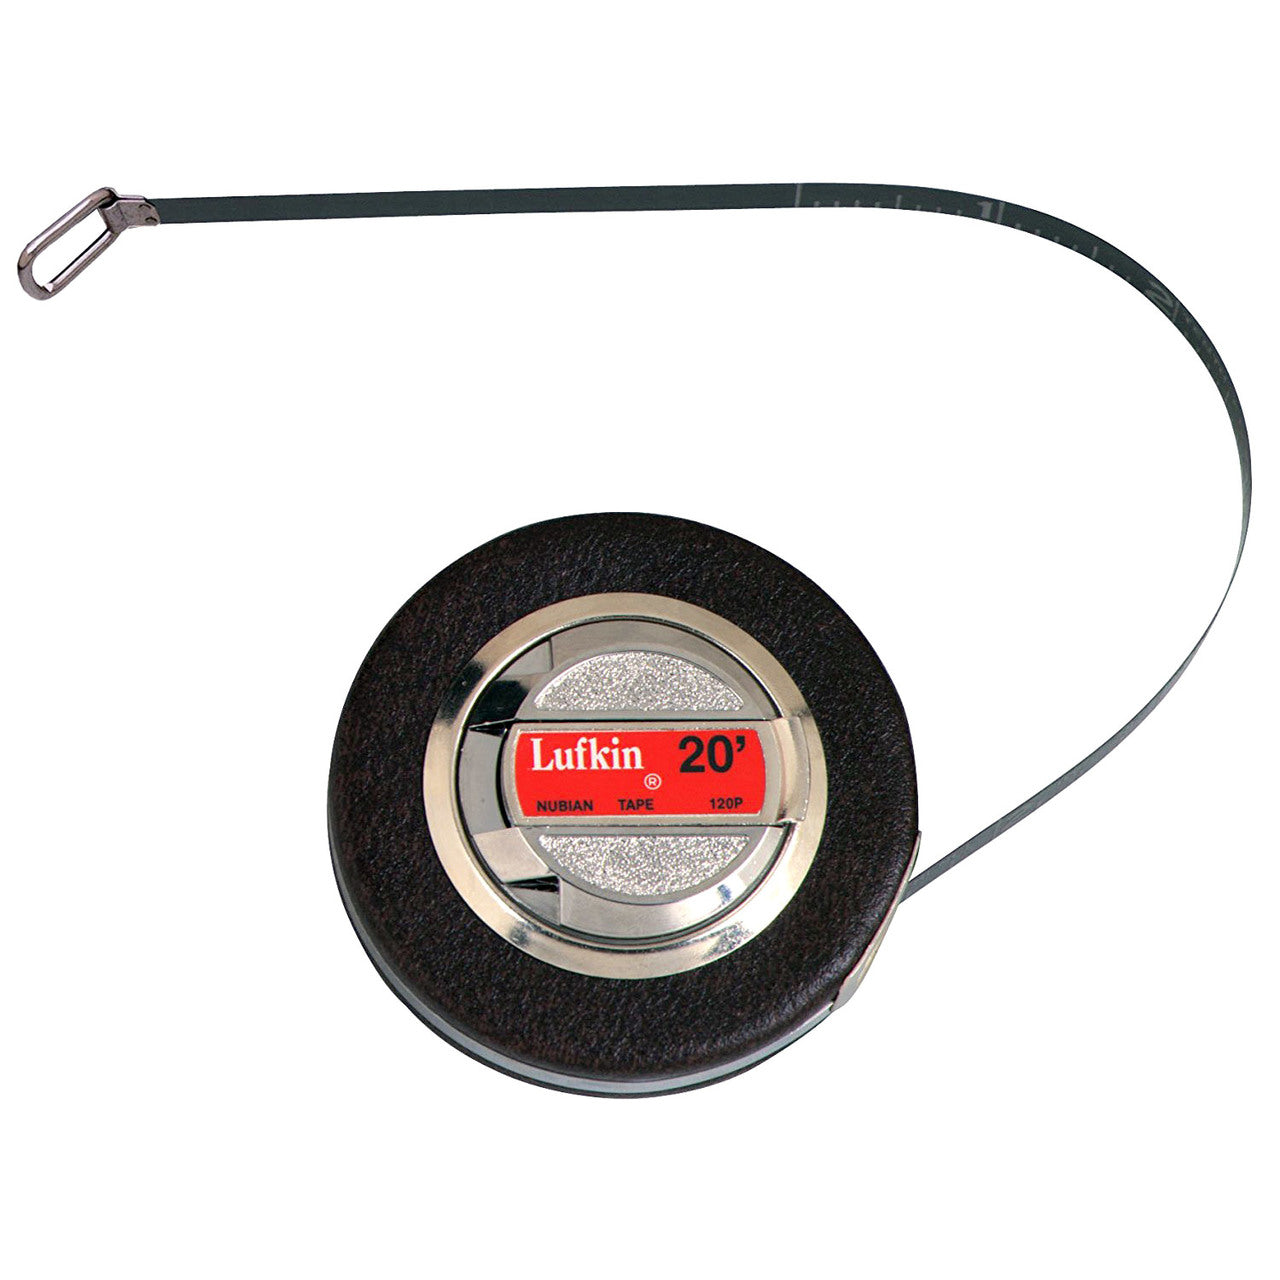 TONKBEEY Metal Diameter Tape for Logging, Trees, Pipes- Use for Measuring  Cylindrical Objects - (Pipe Tape, Tree Tape) Model 